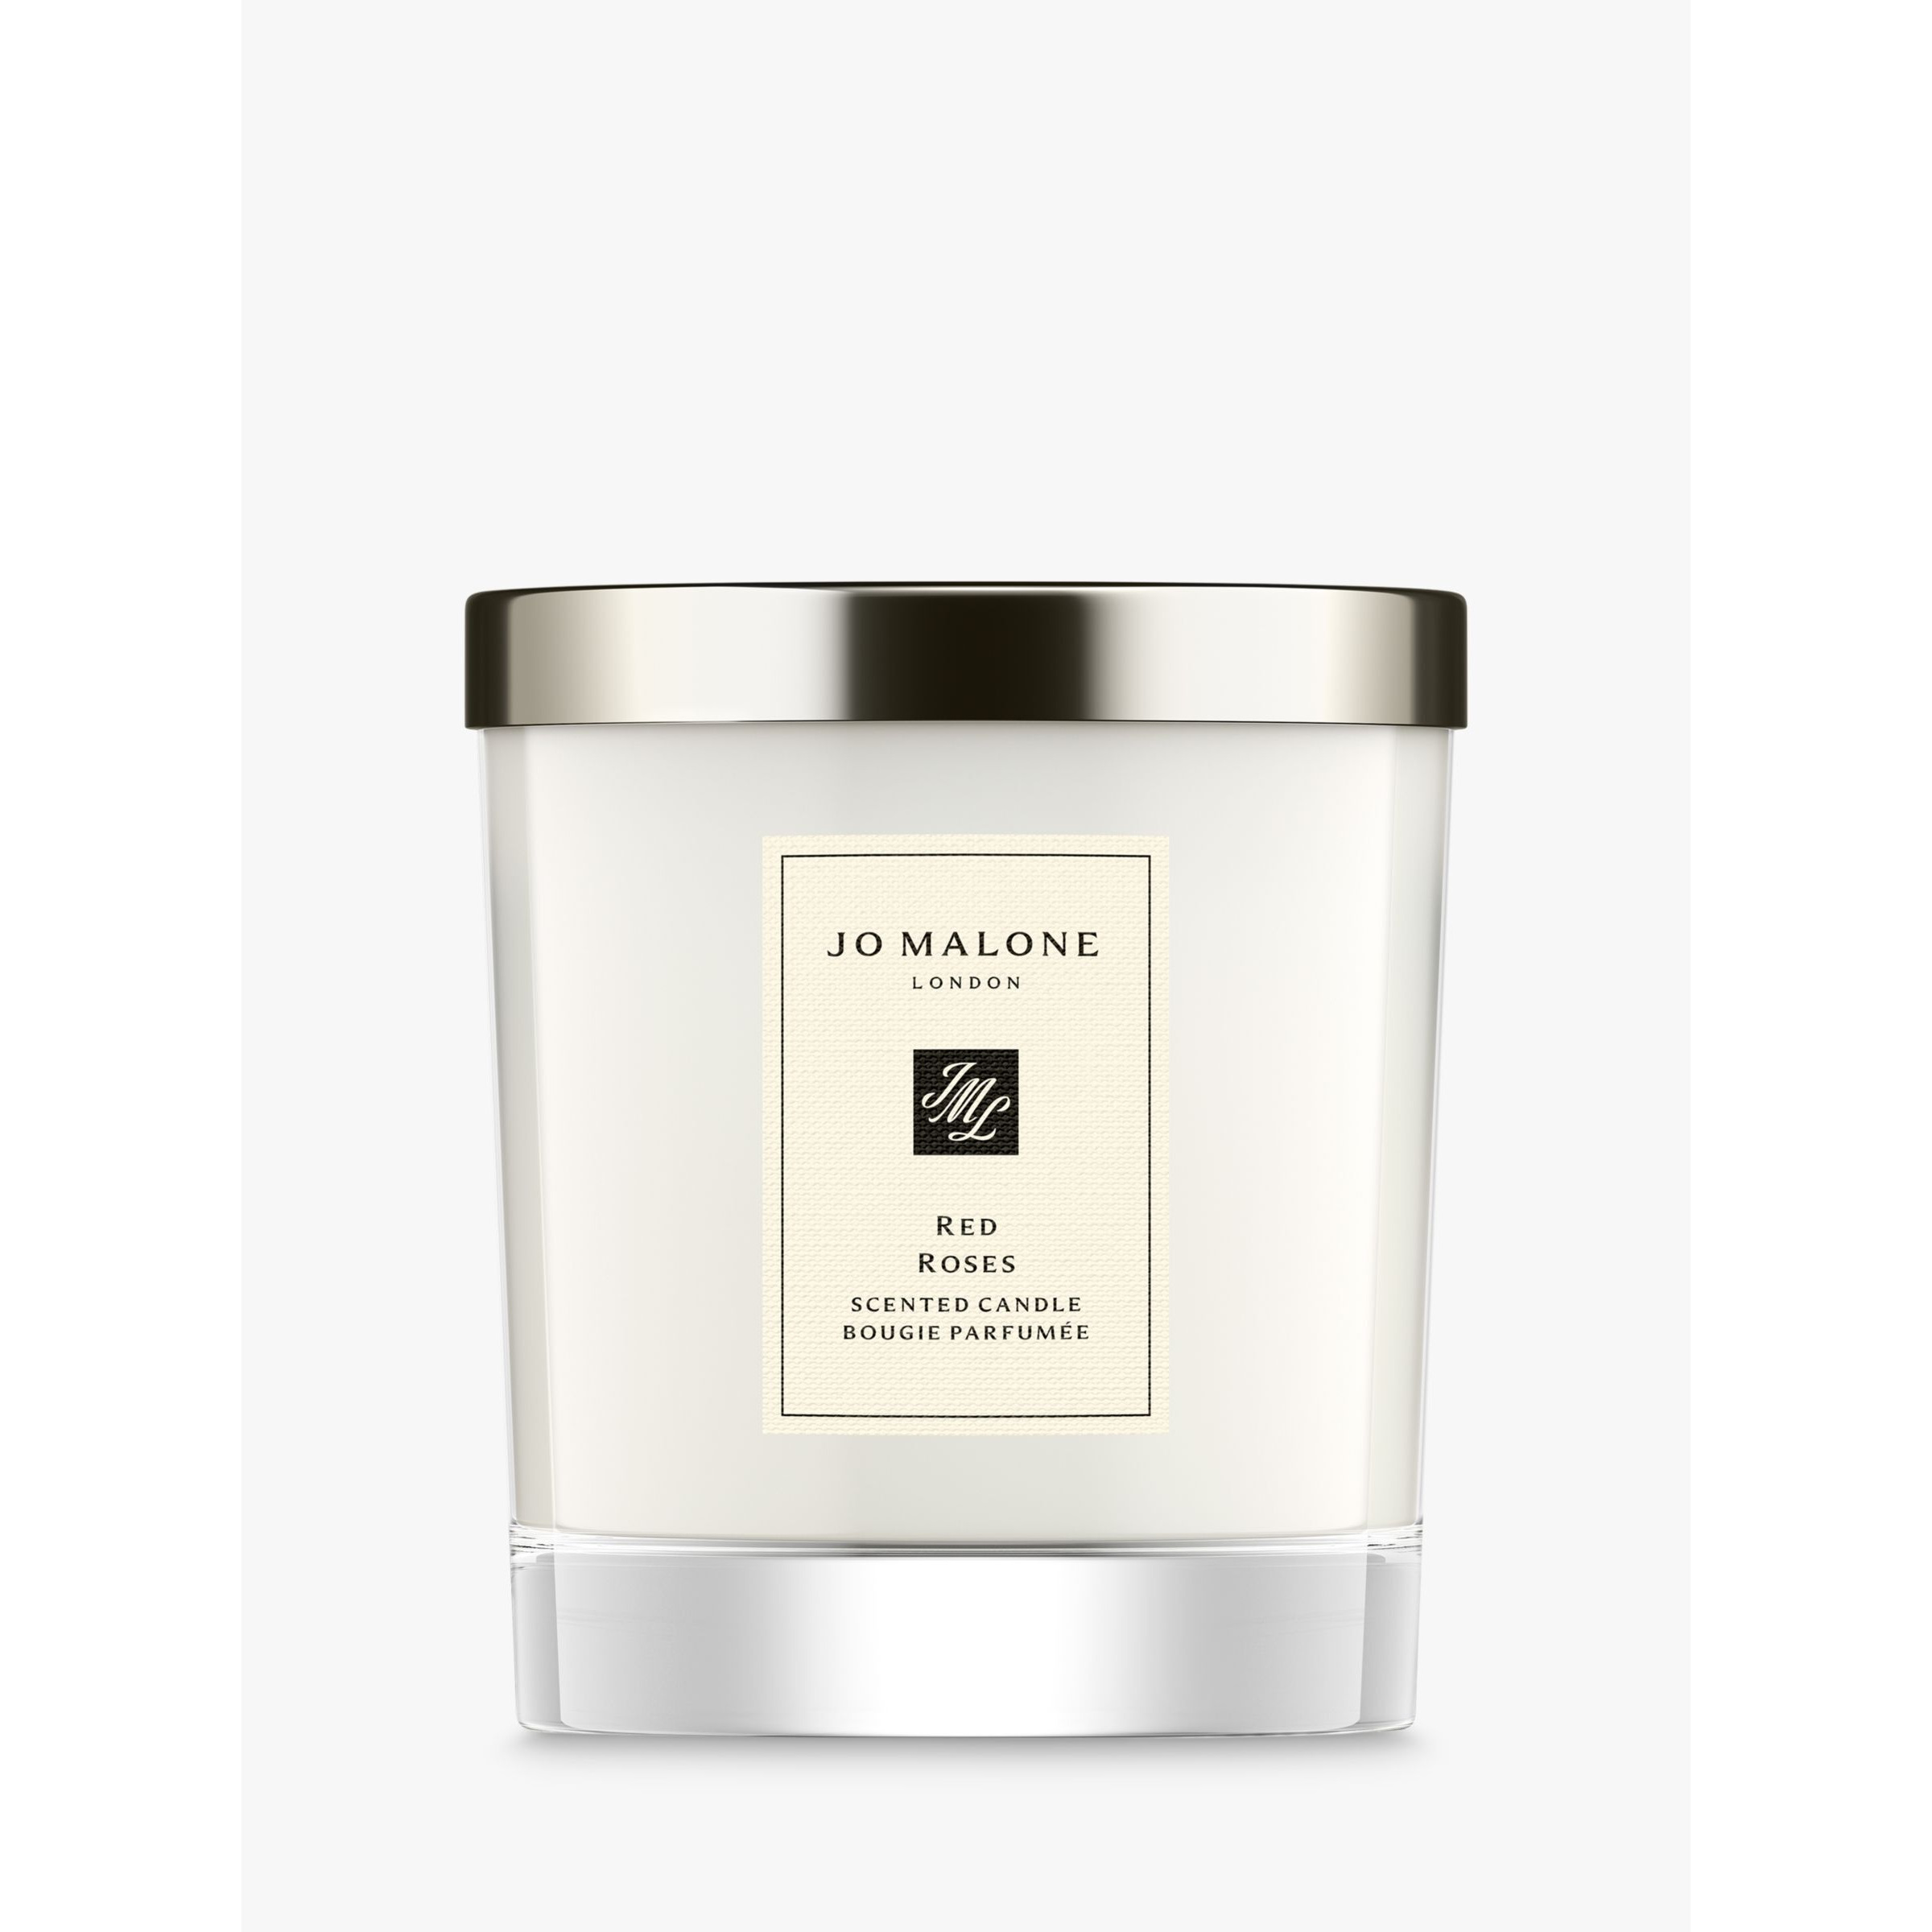 Jo Malone London Red Roses Home Scented Candle, 200g - image 1